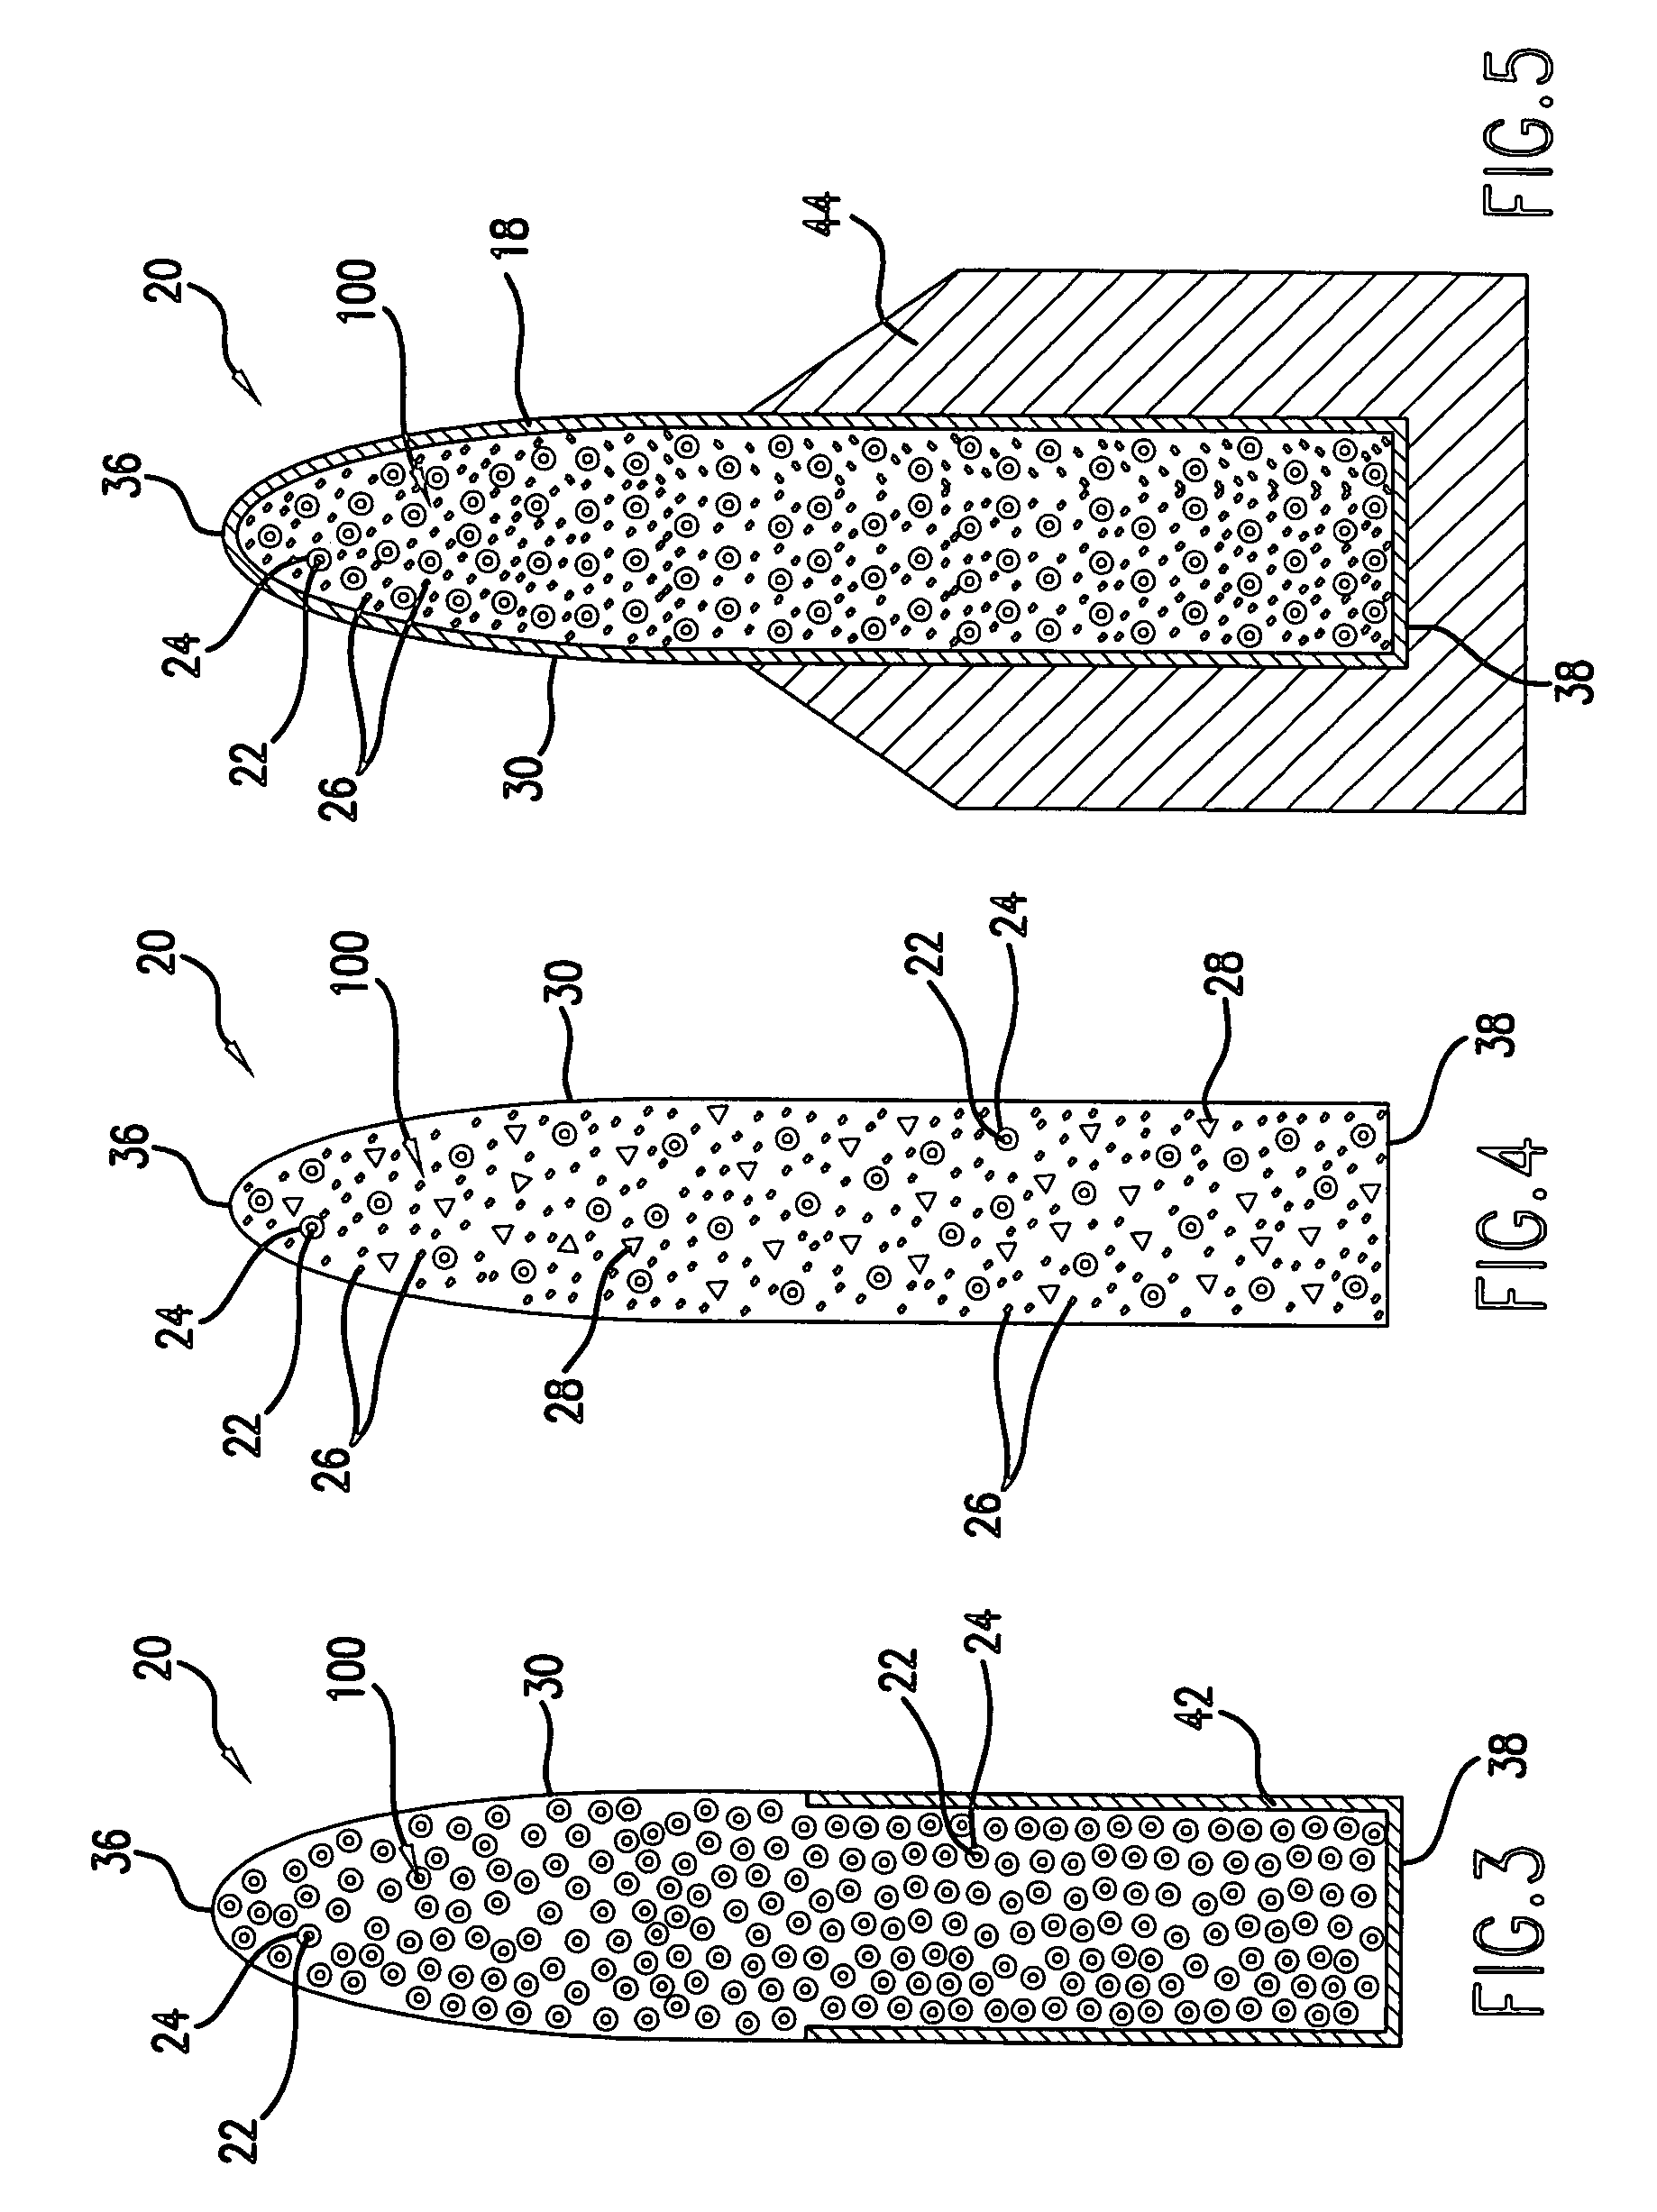 Method and apparatus for a projectile incorporating a metastable interstitial composite material